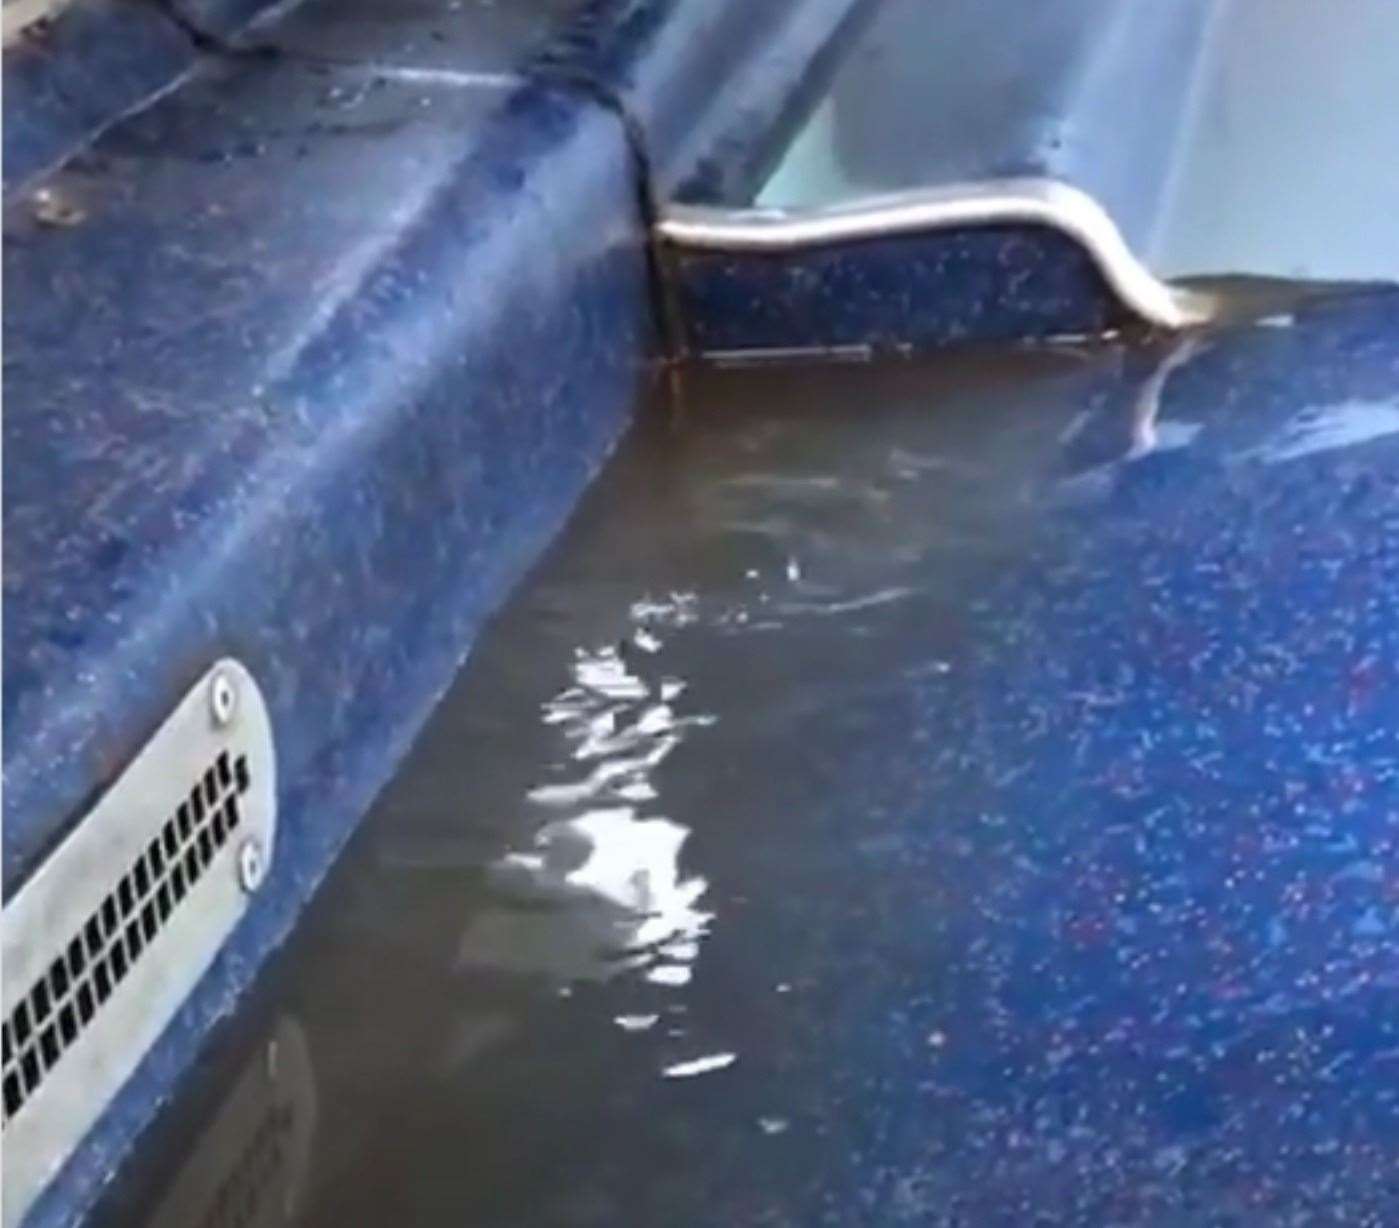 Both levels of the double decker bus in Ashford as well as the stairs were covered in water